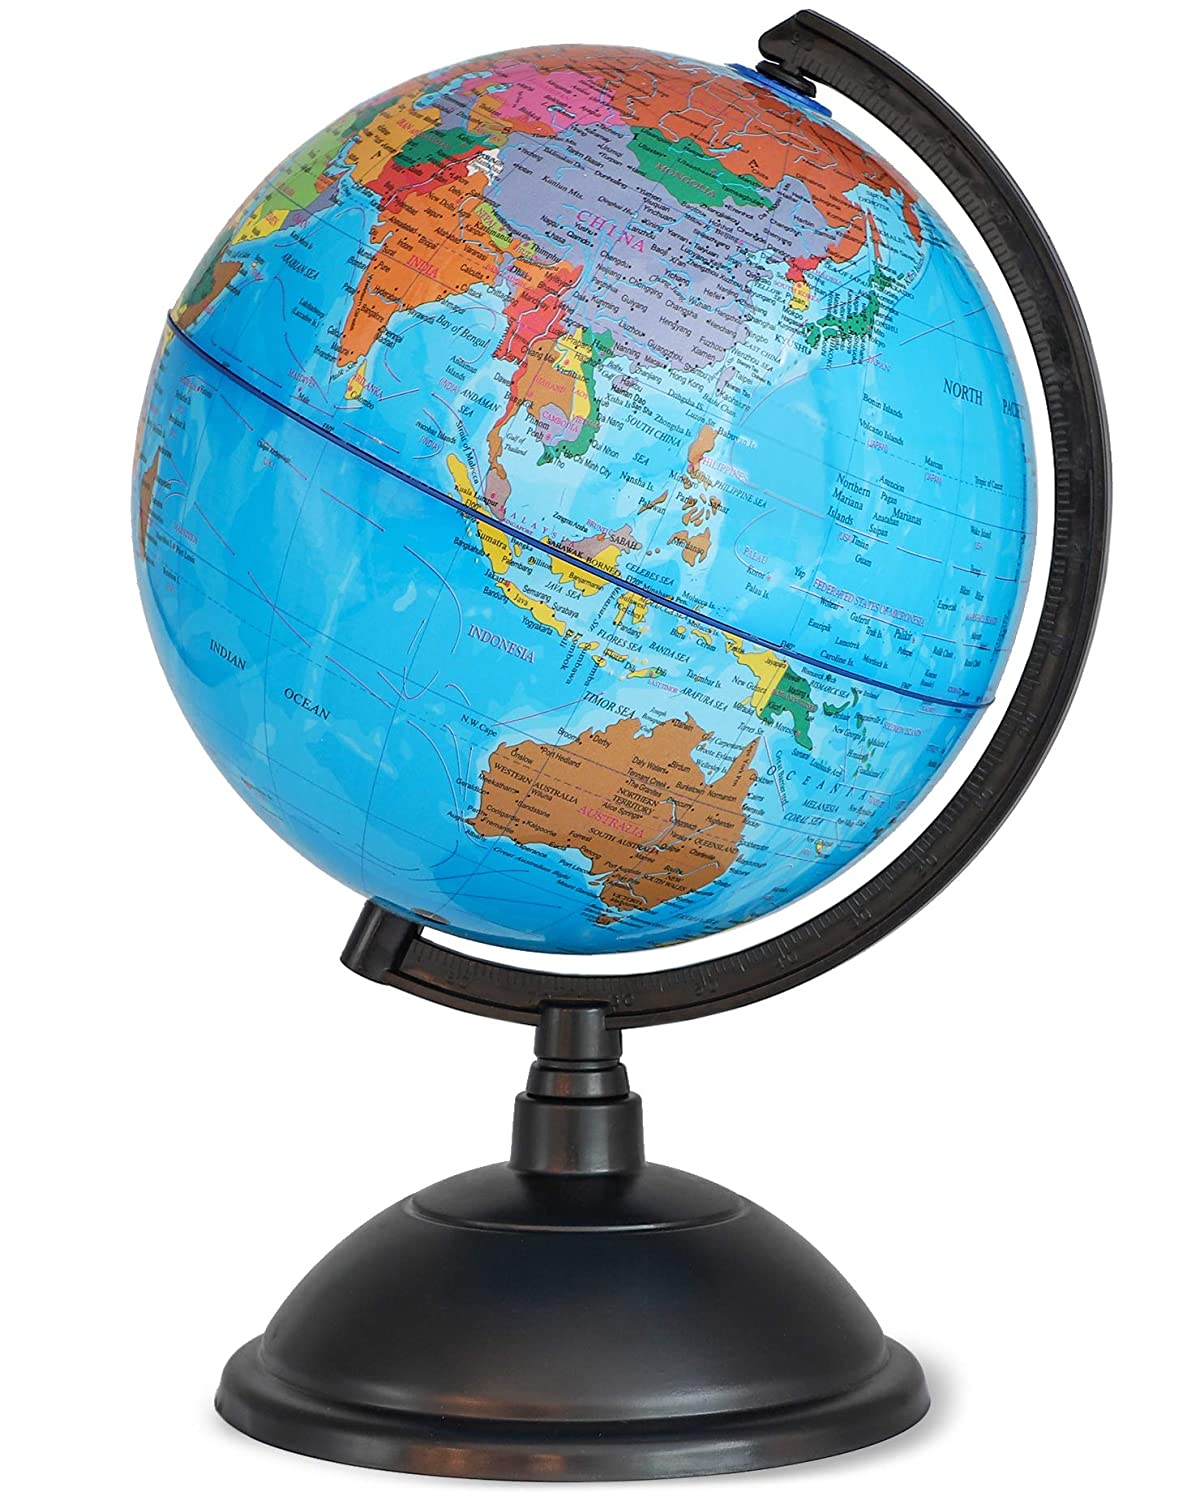 World Globe for Kids - 8 Inch Globe of World Perfect Spinning Globe for Kids, Geography Students, Teachers and More.